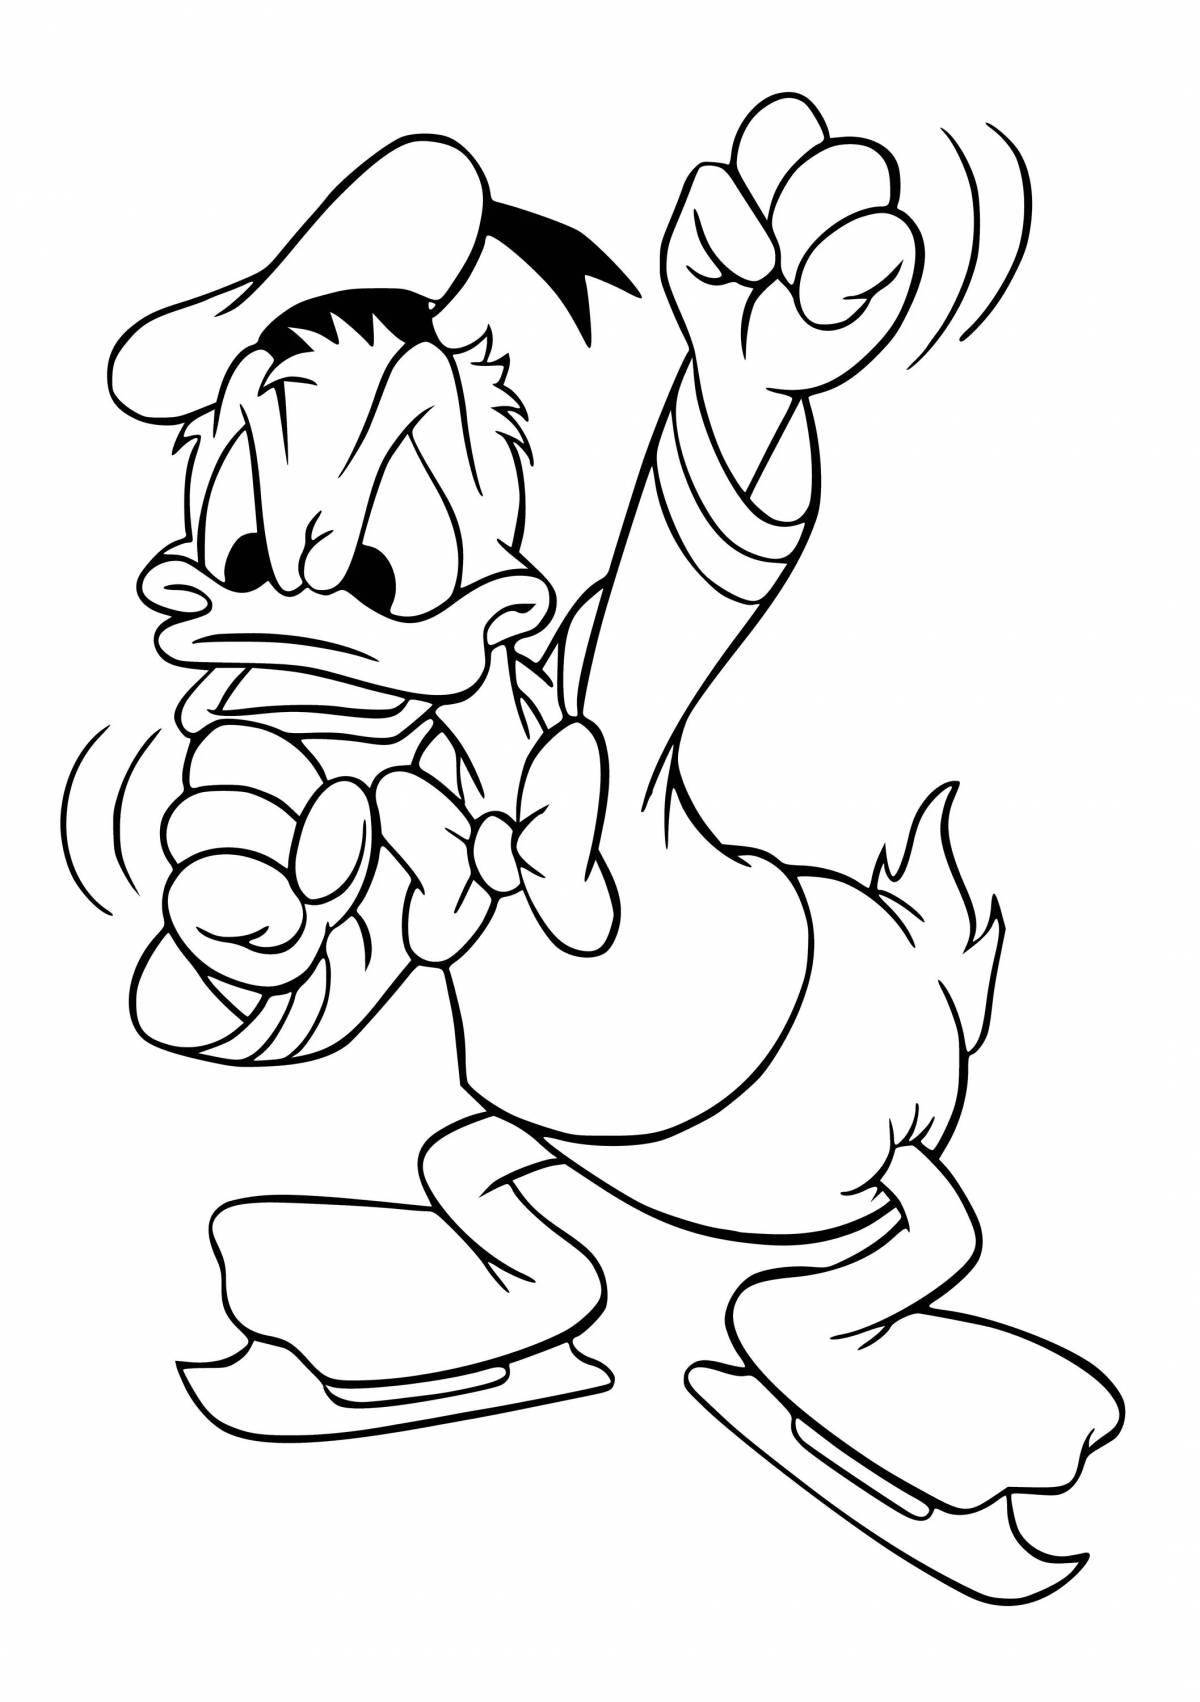 Coloring page of an adorable cartoon character